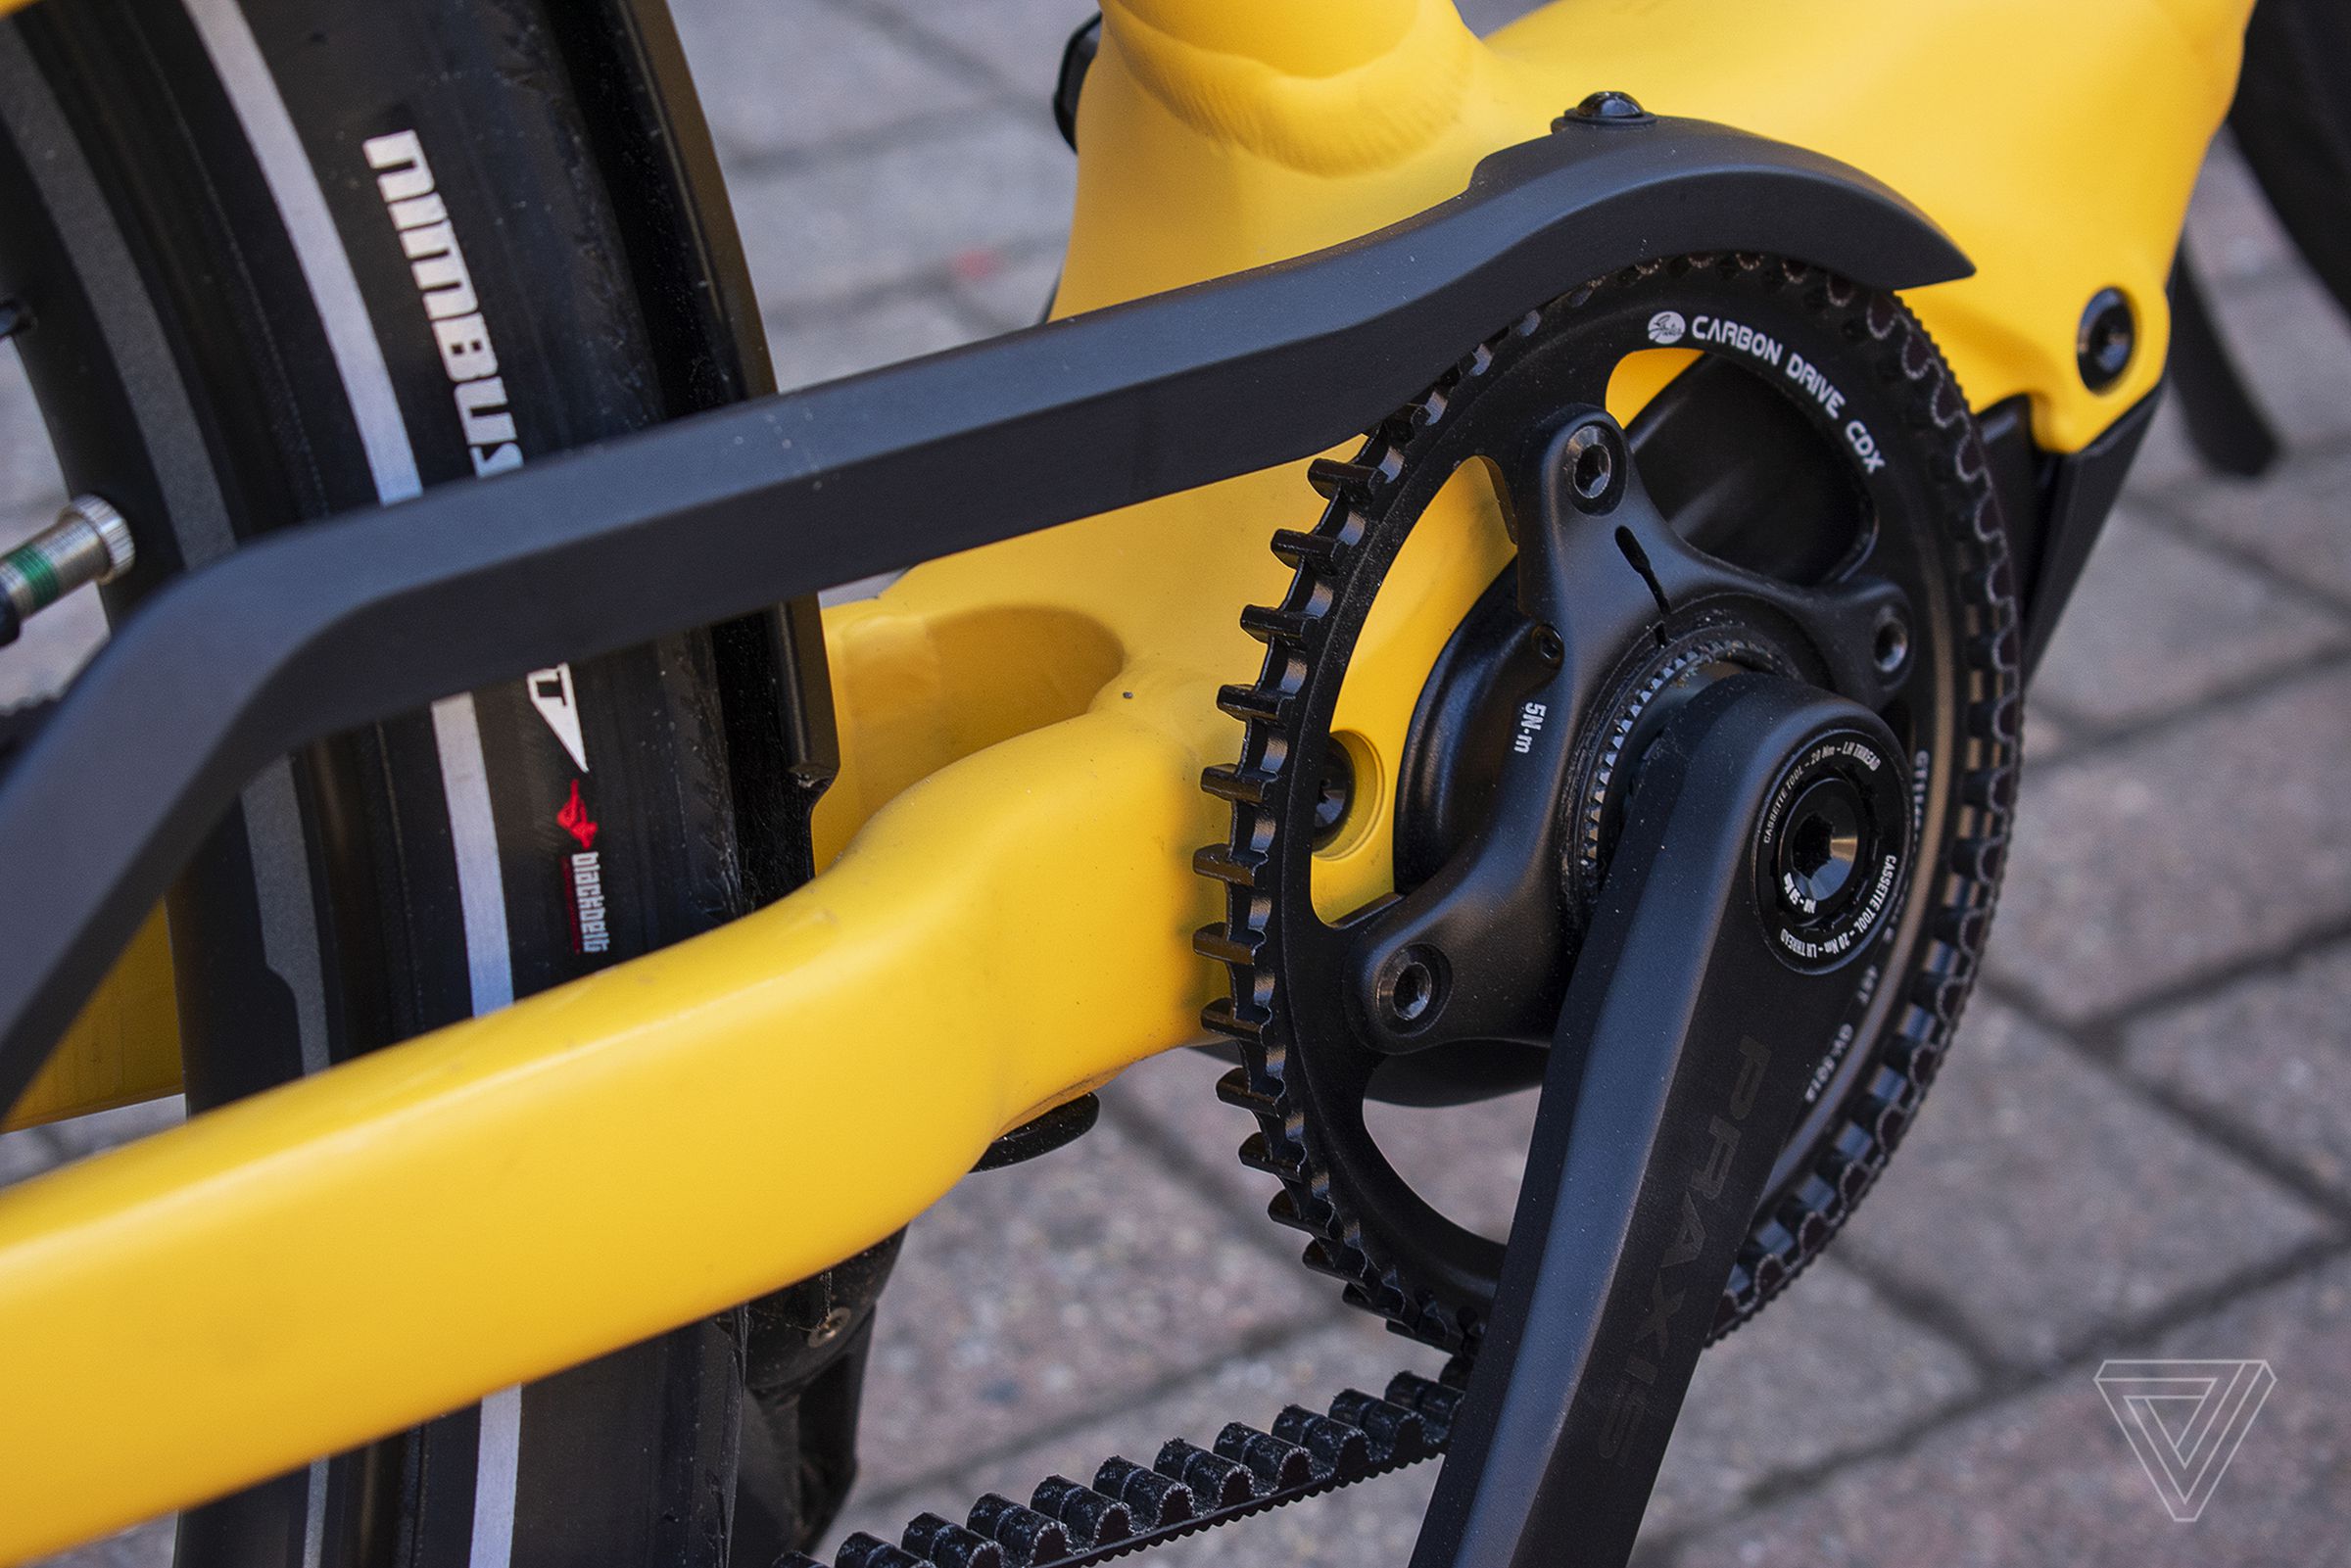 The Gates carbon belt drive is cleaner and easier to maintain than a traditional chainring. 